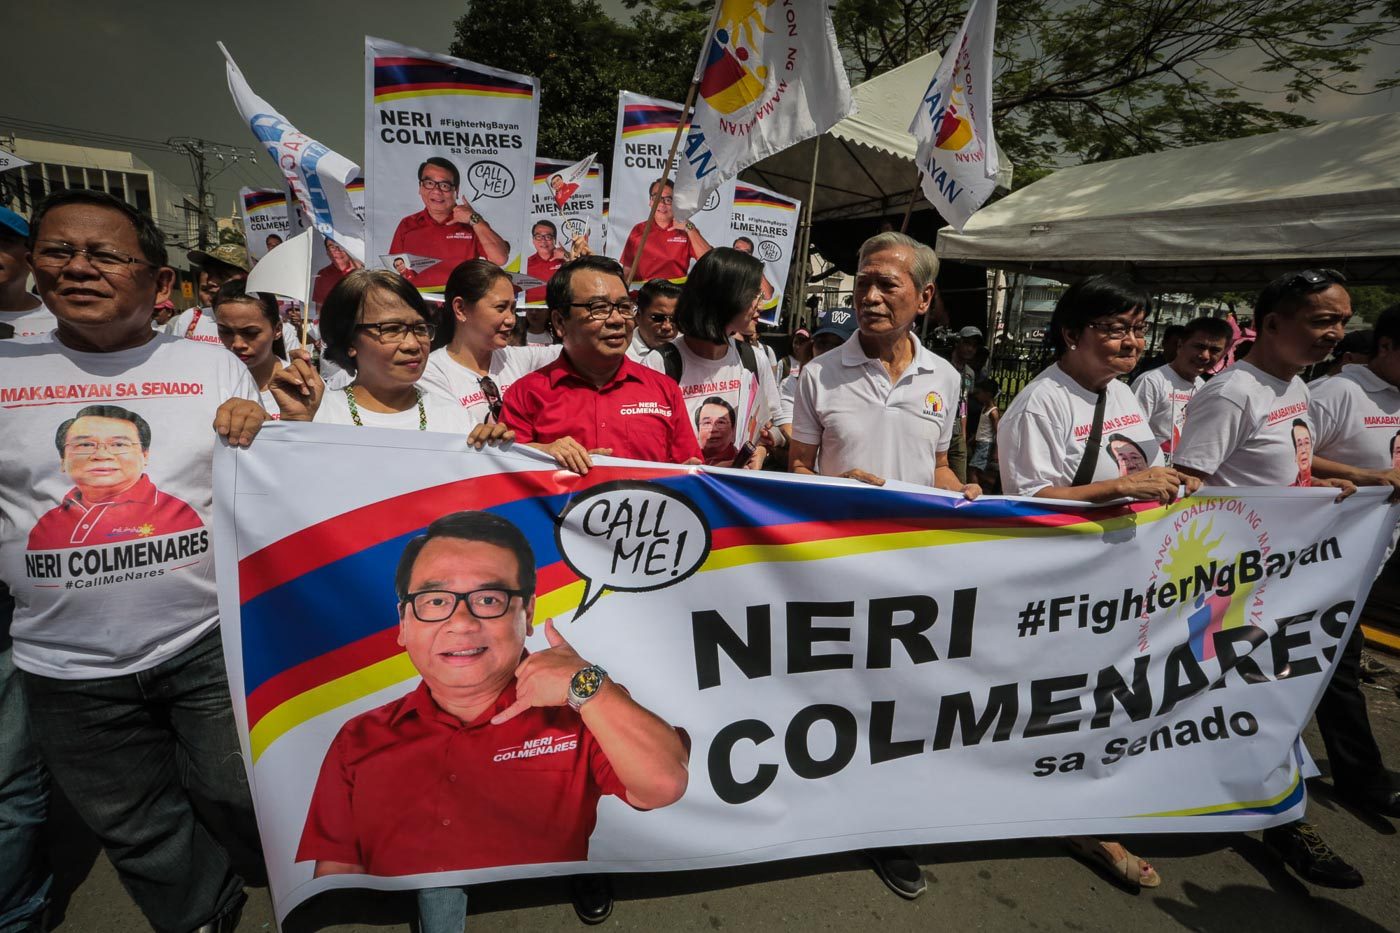 Neri Colmenares wants badly to be the first Leftist in the Senate